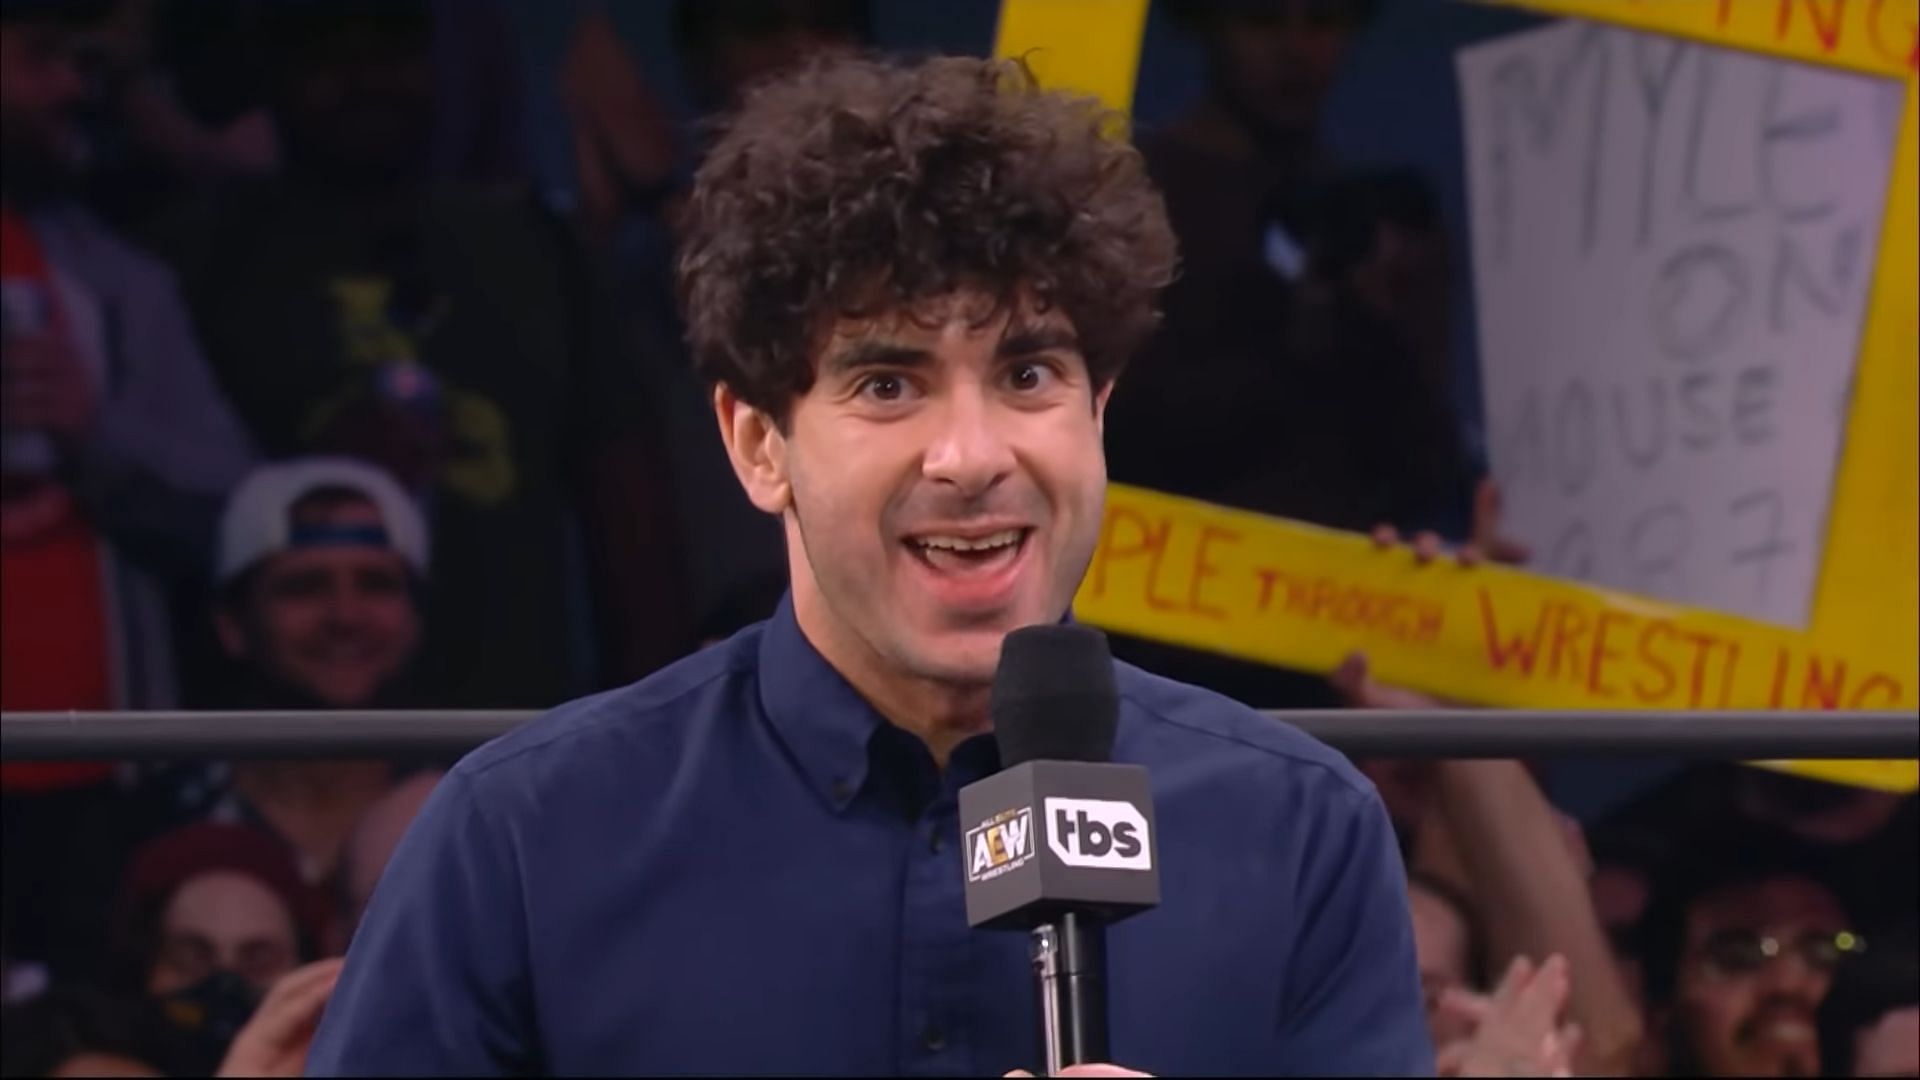 Tony Khan is the CEO and Creative Head of AEW